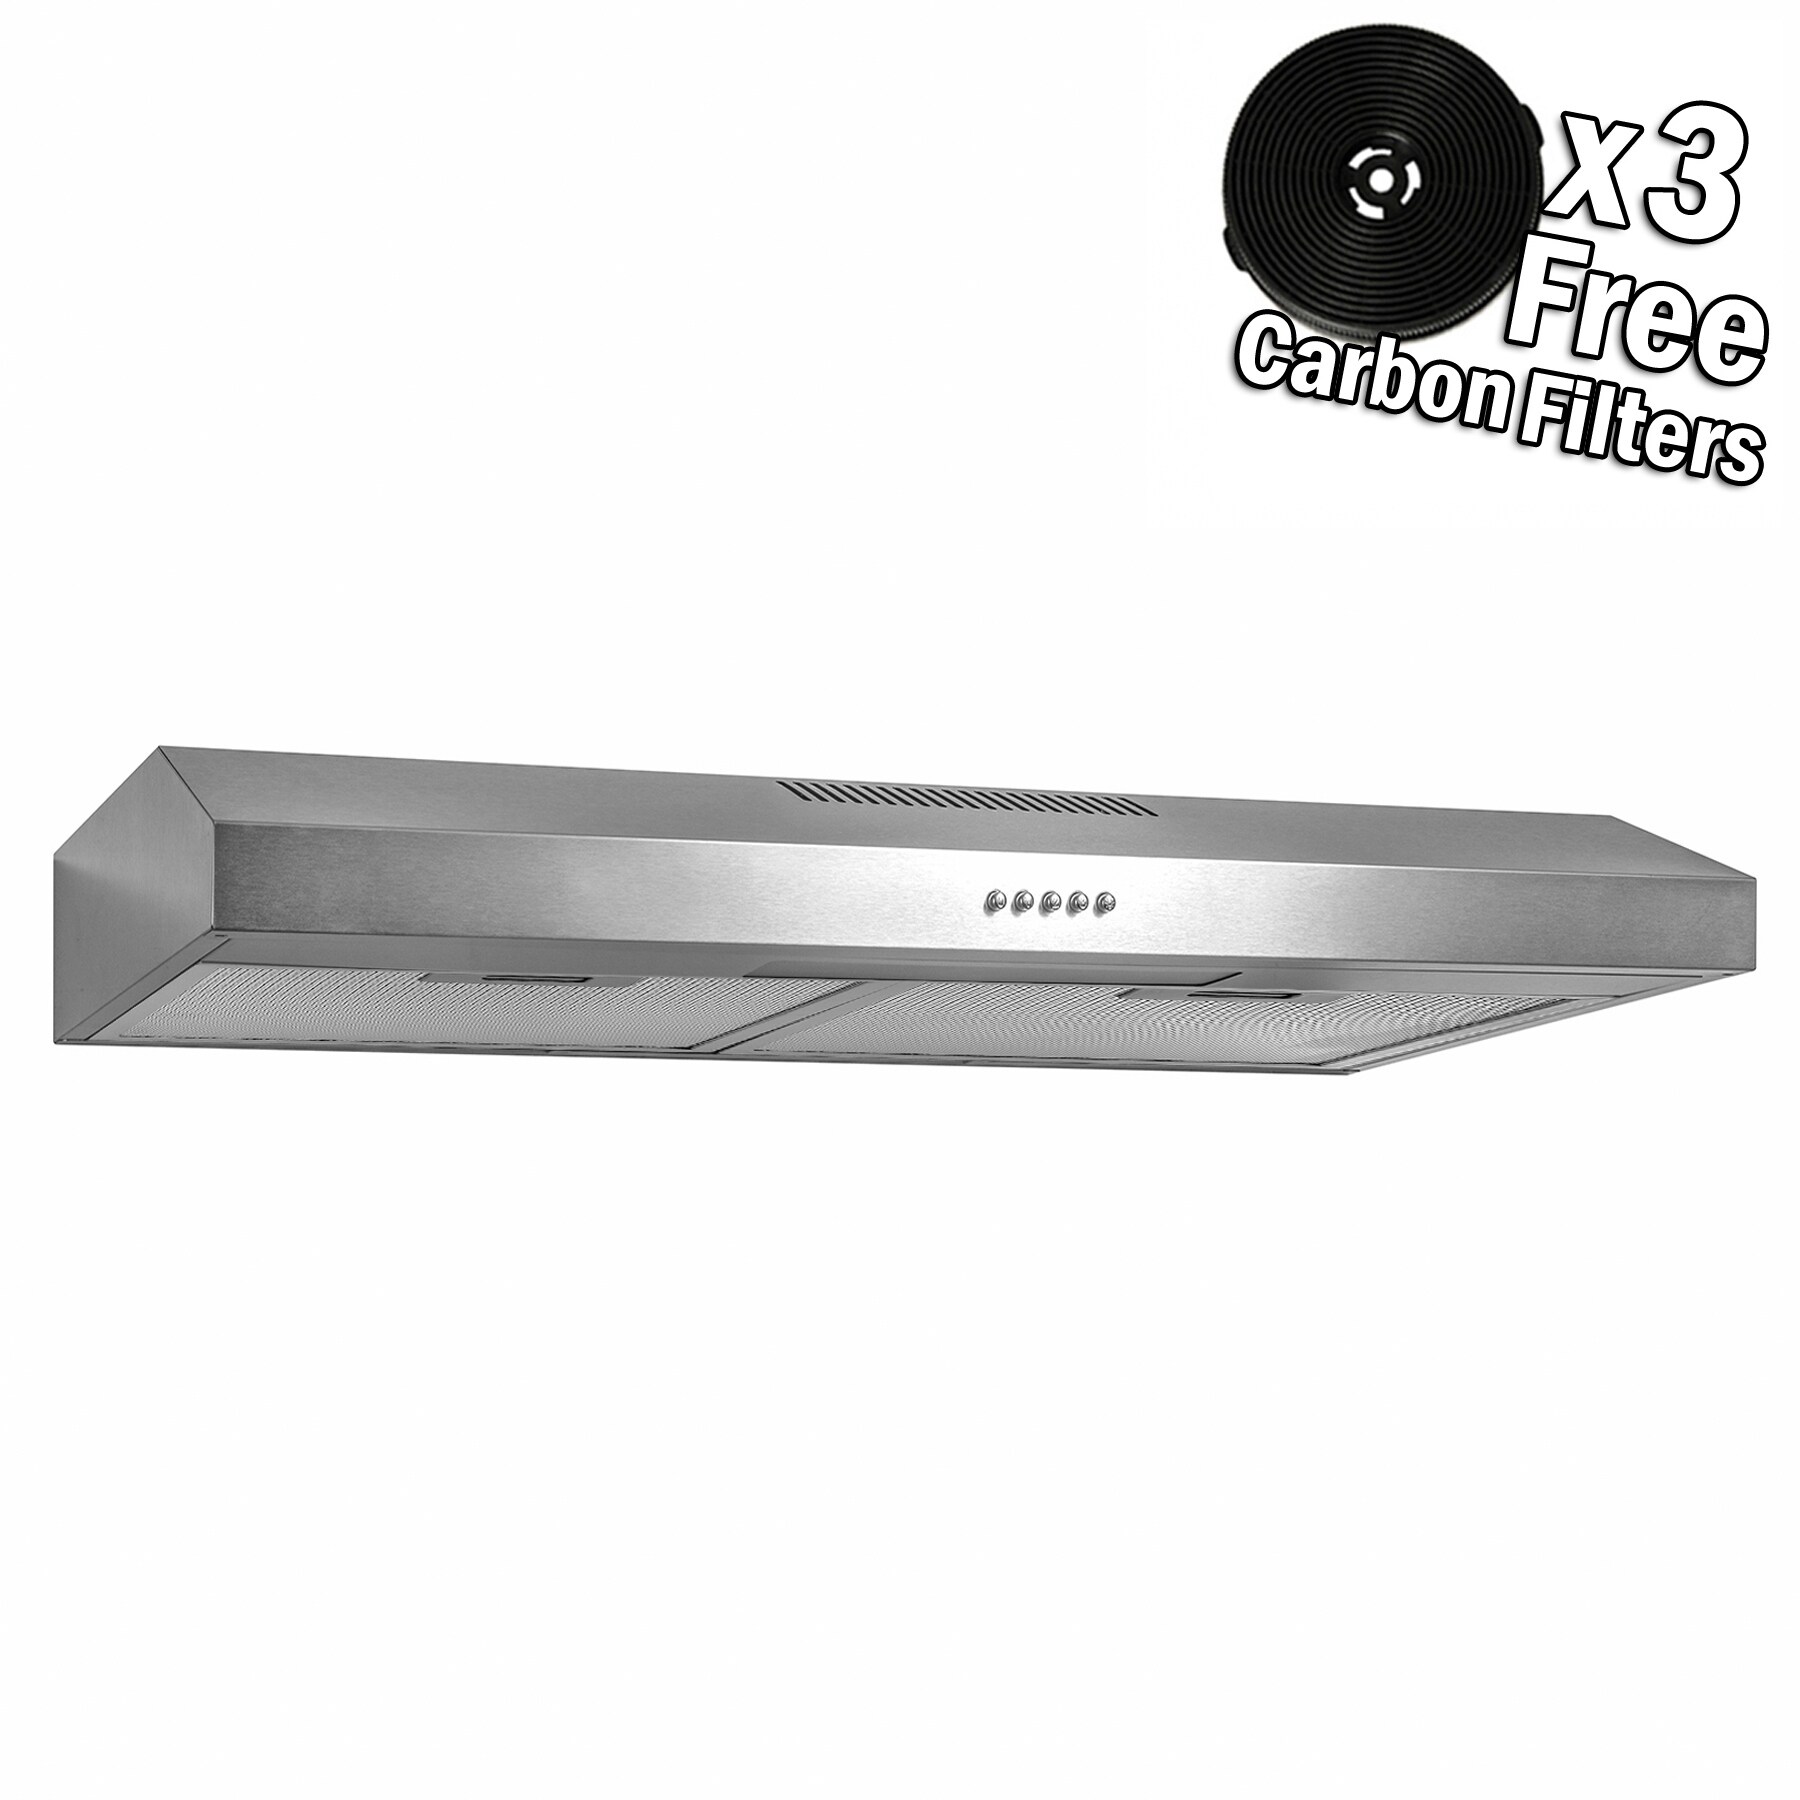 24 AKDY 24 Under Cabinet Stainless Steel Push Panel Kitchen Range Hood Cooking Fan w/Carbon Filters …